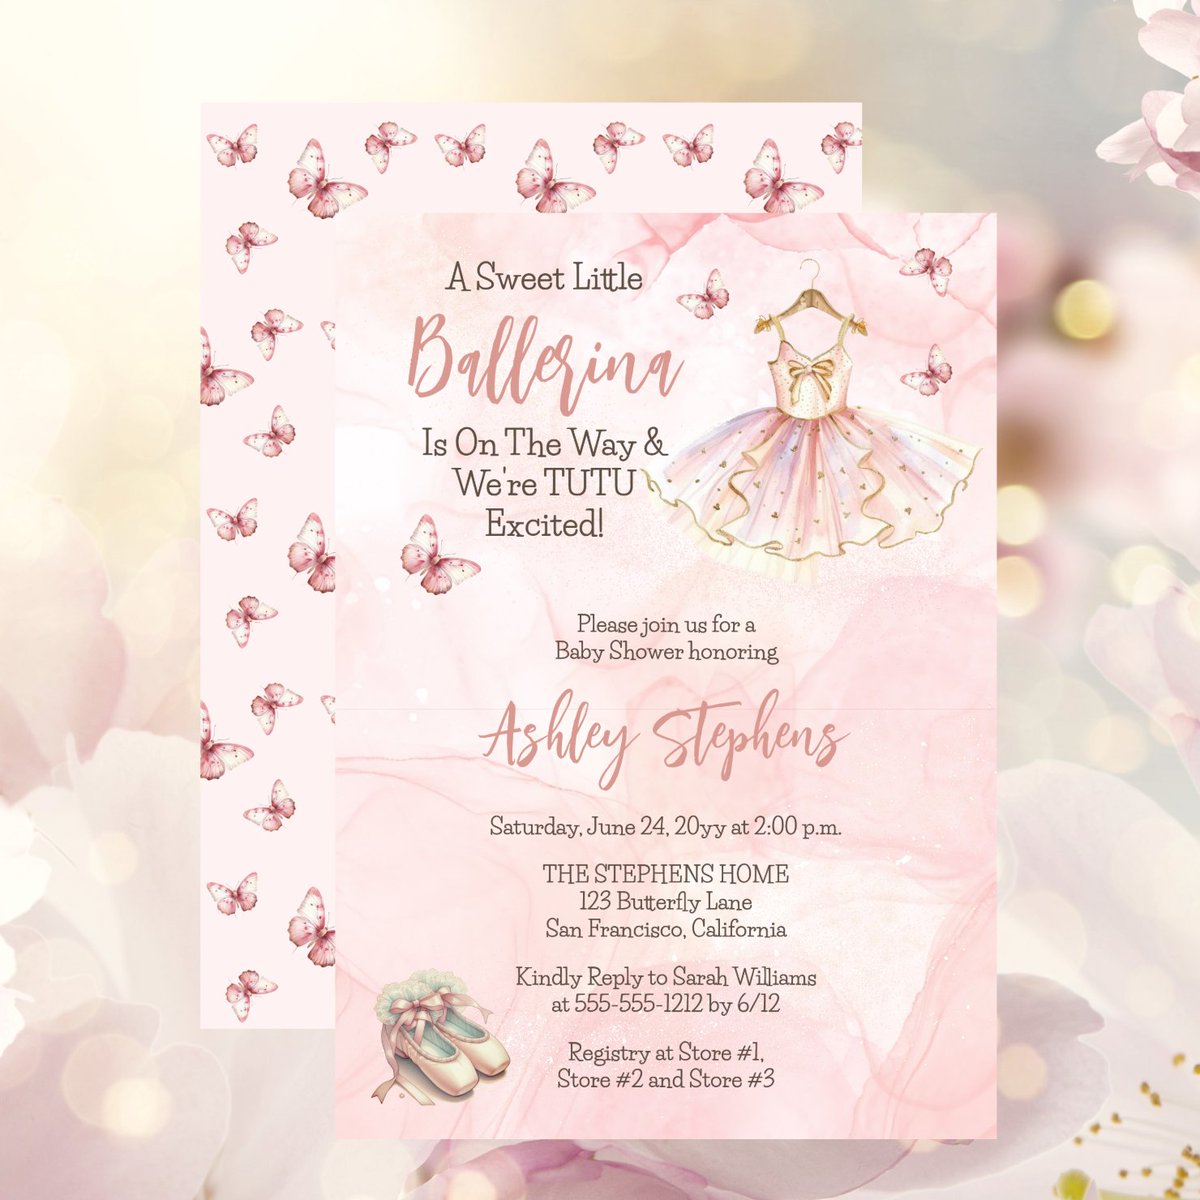 'A Sweet Little Ballerina Is On The Way and We Are Tutu Excited!' Tutu Baby Shower Invitation 
zazzle.com/little_balleri…

#littleballerina #ballerina #pink #girlbabyshower #tutu #butterflies #butterfly #watercolor #alcoholandink #babyshowerinvitations #tutuexcited  #zazzlemade